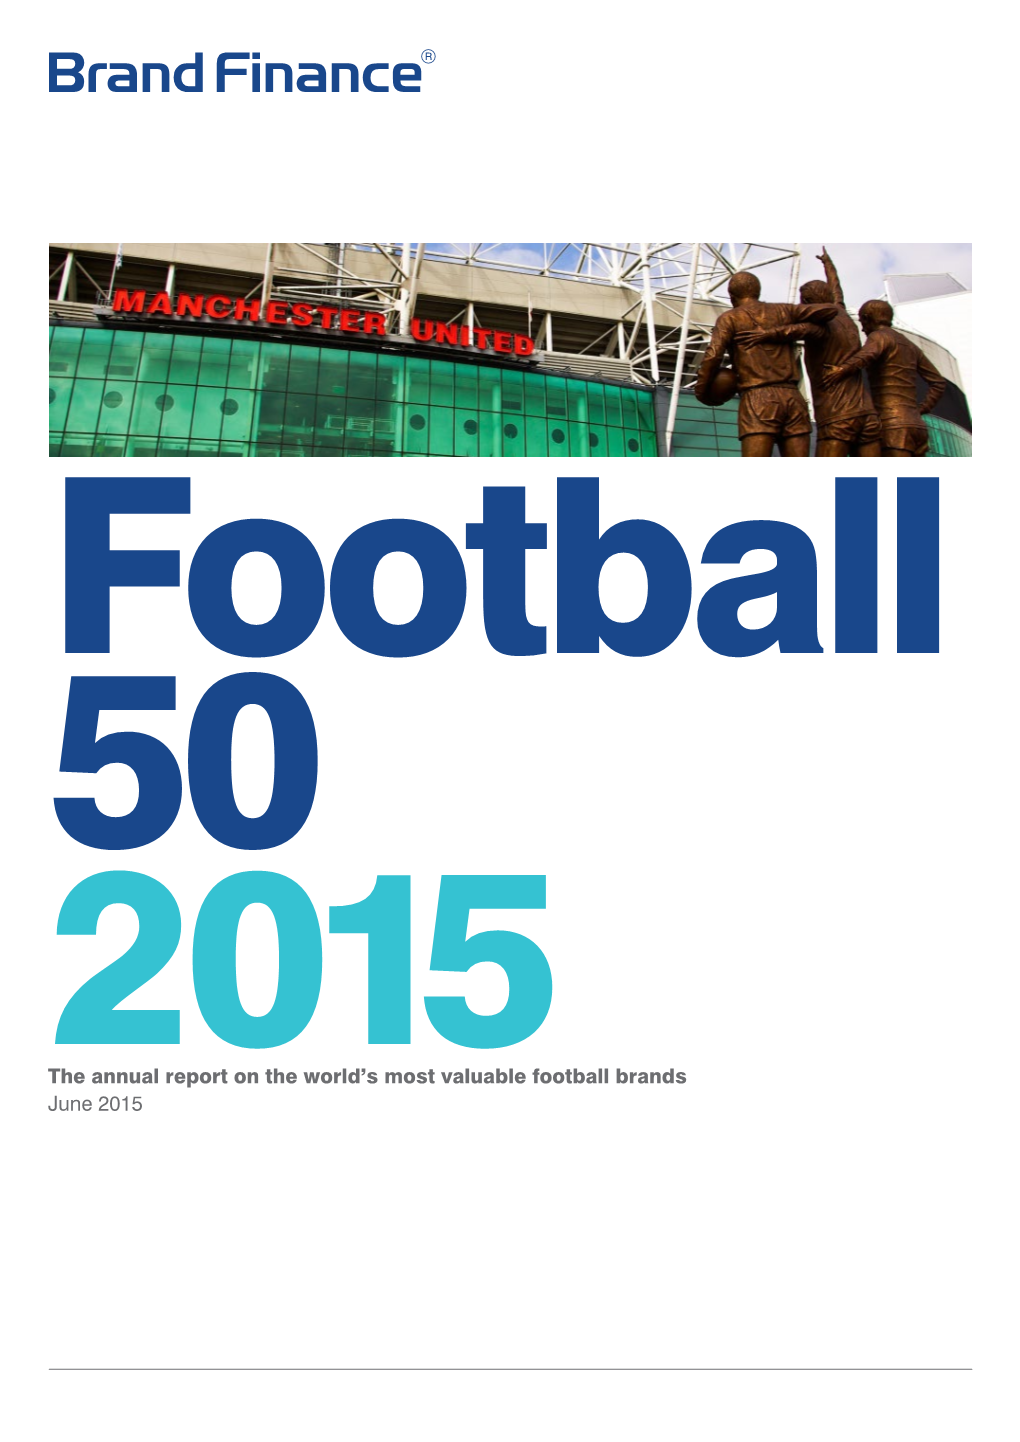 The Annual Report on the World's Most Valuable Football Brands June 2015